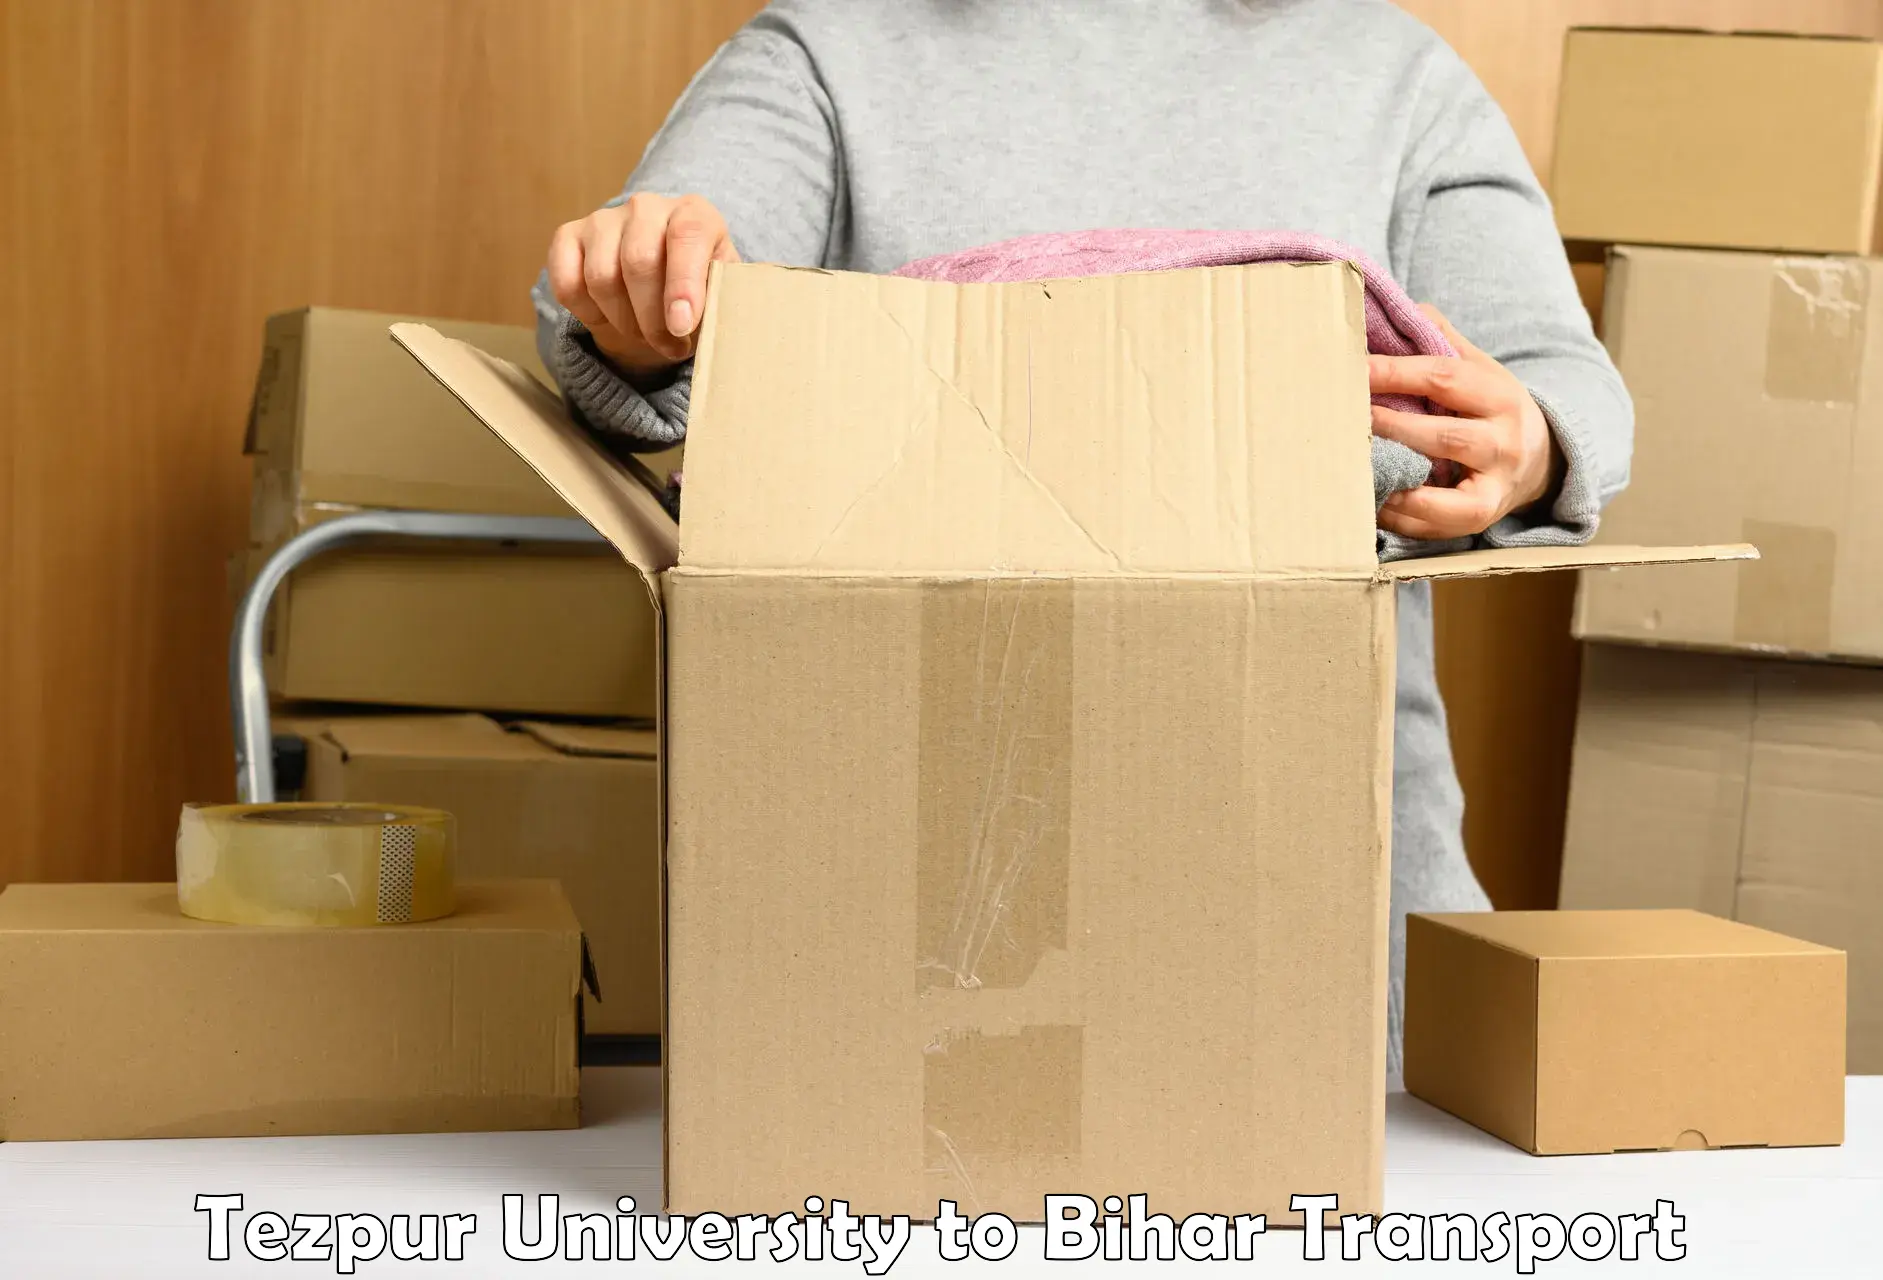 Parcel transport services in Tezpur University to Kumarkhand